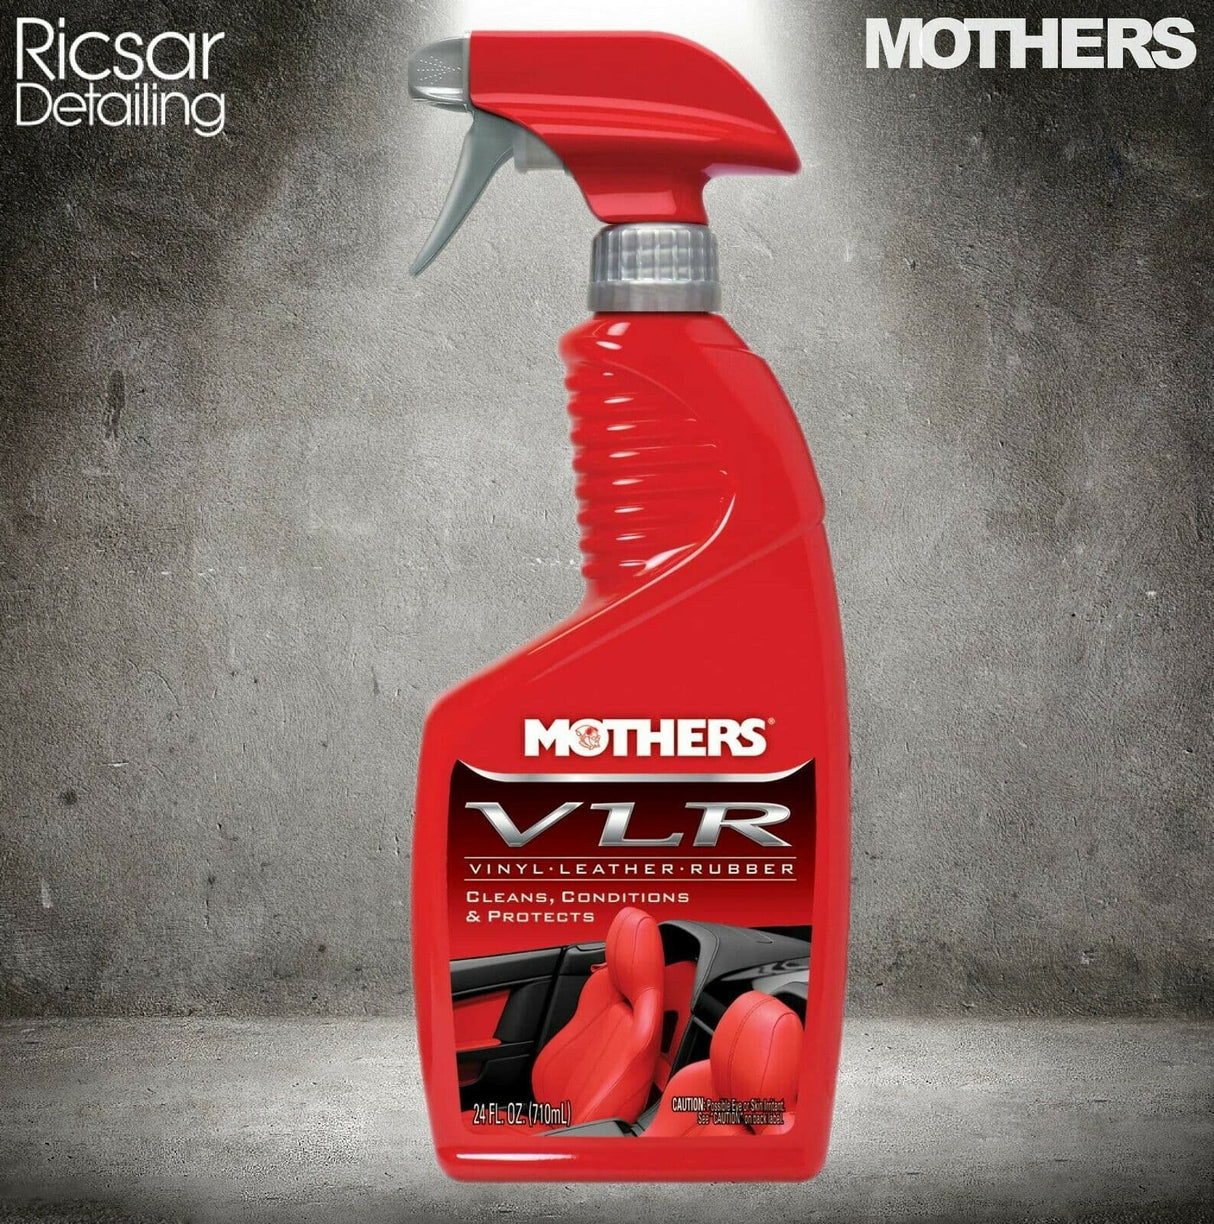 Mothers VLR Vinyl, Leather and Rubber Cleaner and Conditioner